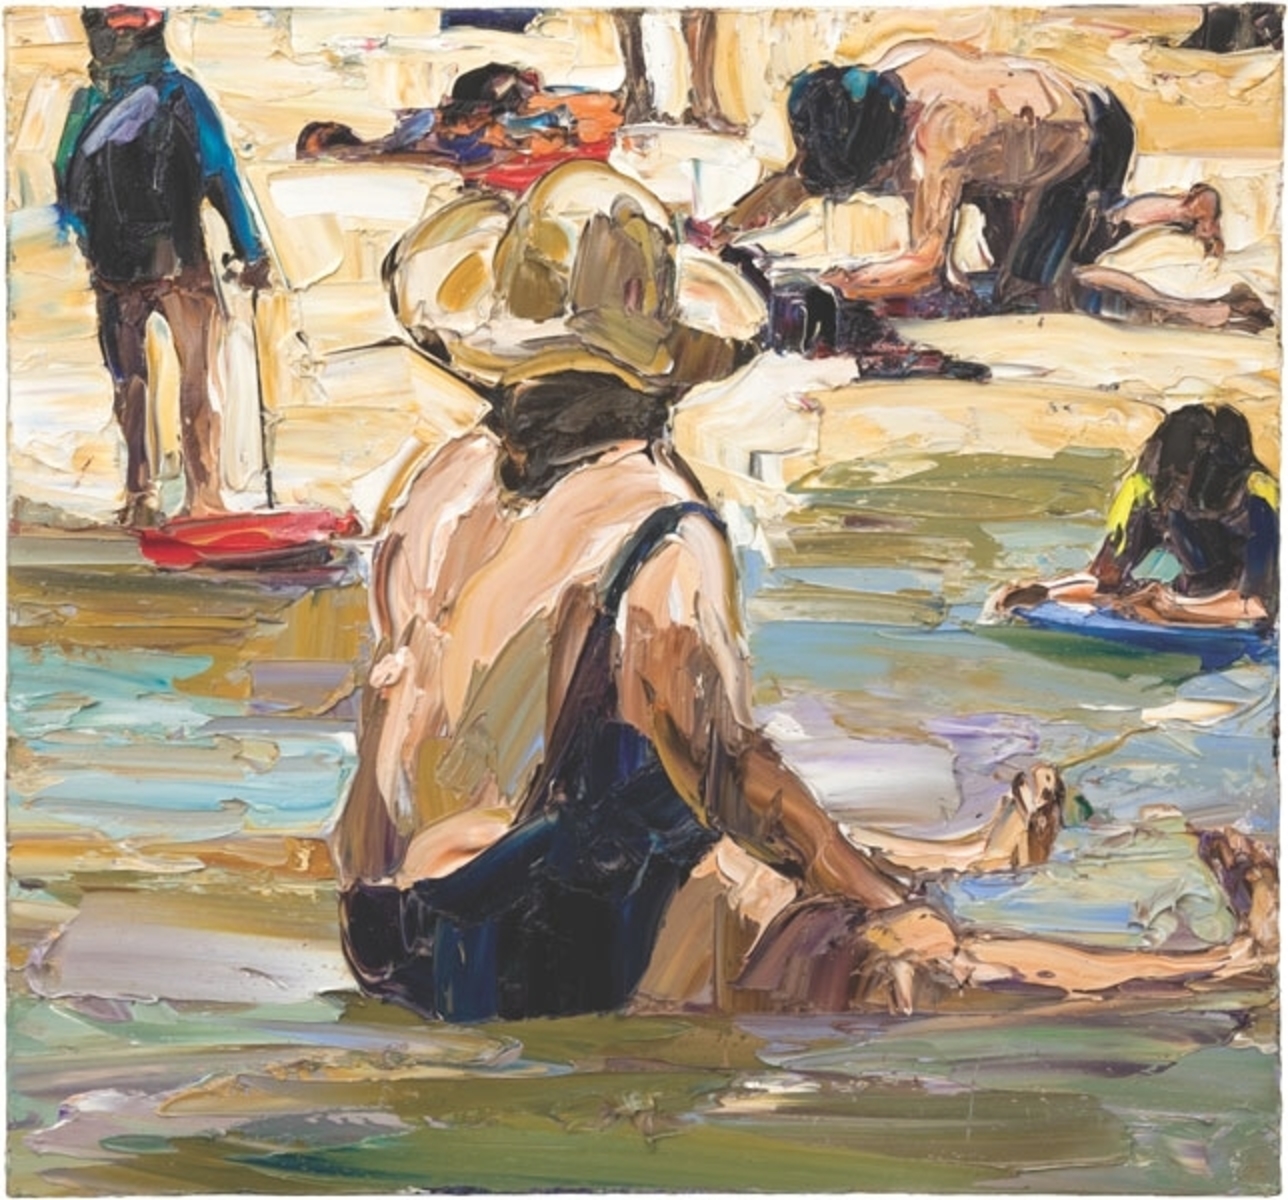 In the shallows (four figures, legs and boards)